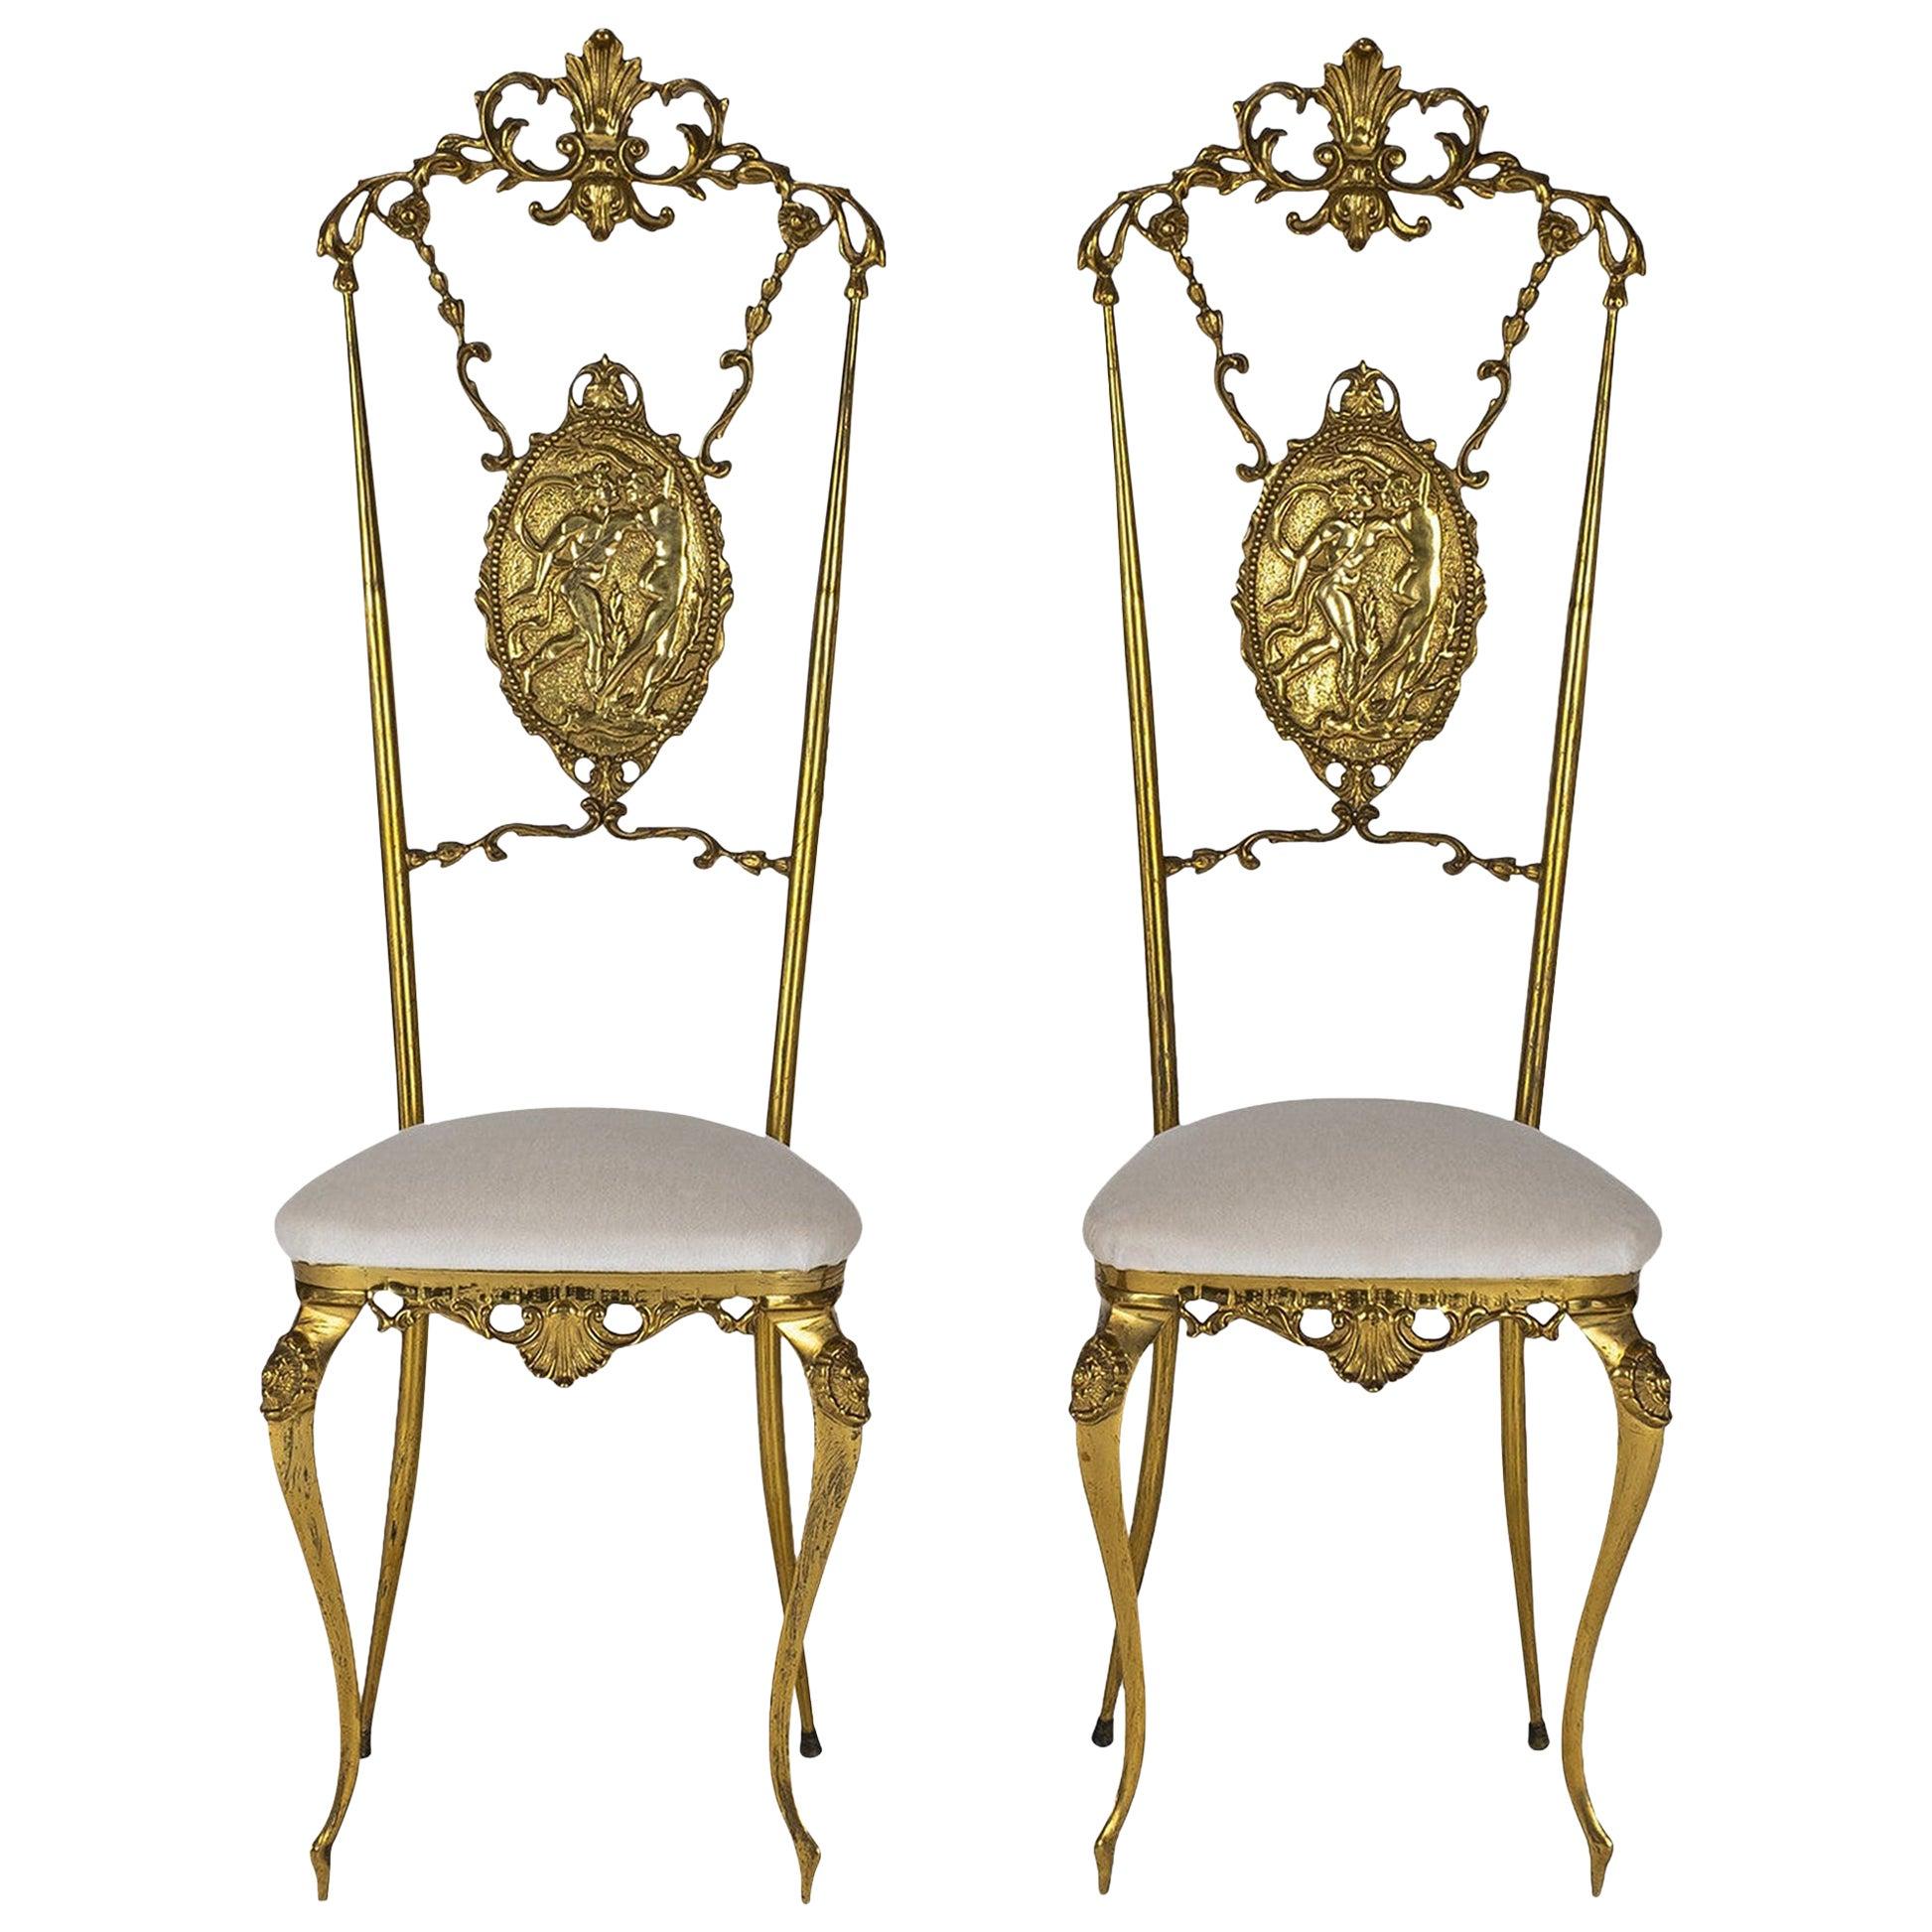 A vintage ornate brass Chiavari chair newly upholstered in a creamy ecru silk velvet.
Two available, $1,600.00 per chair.